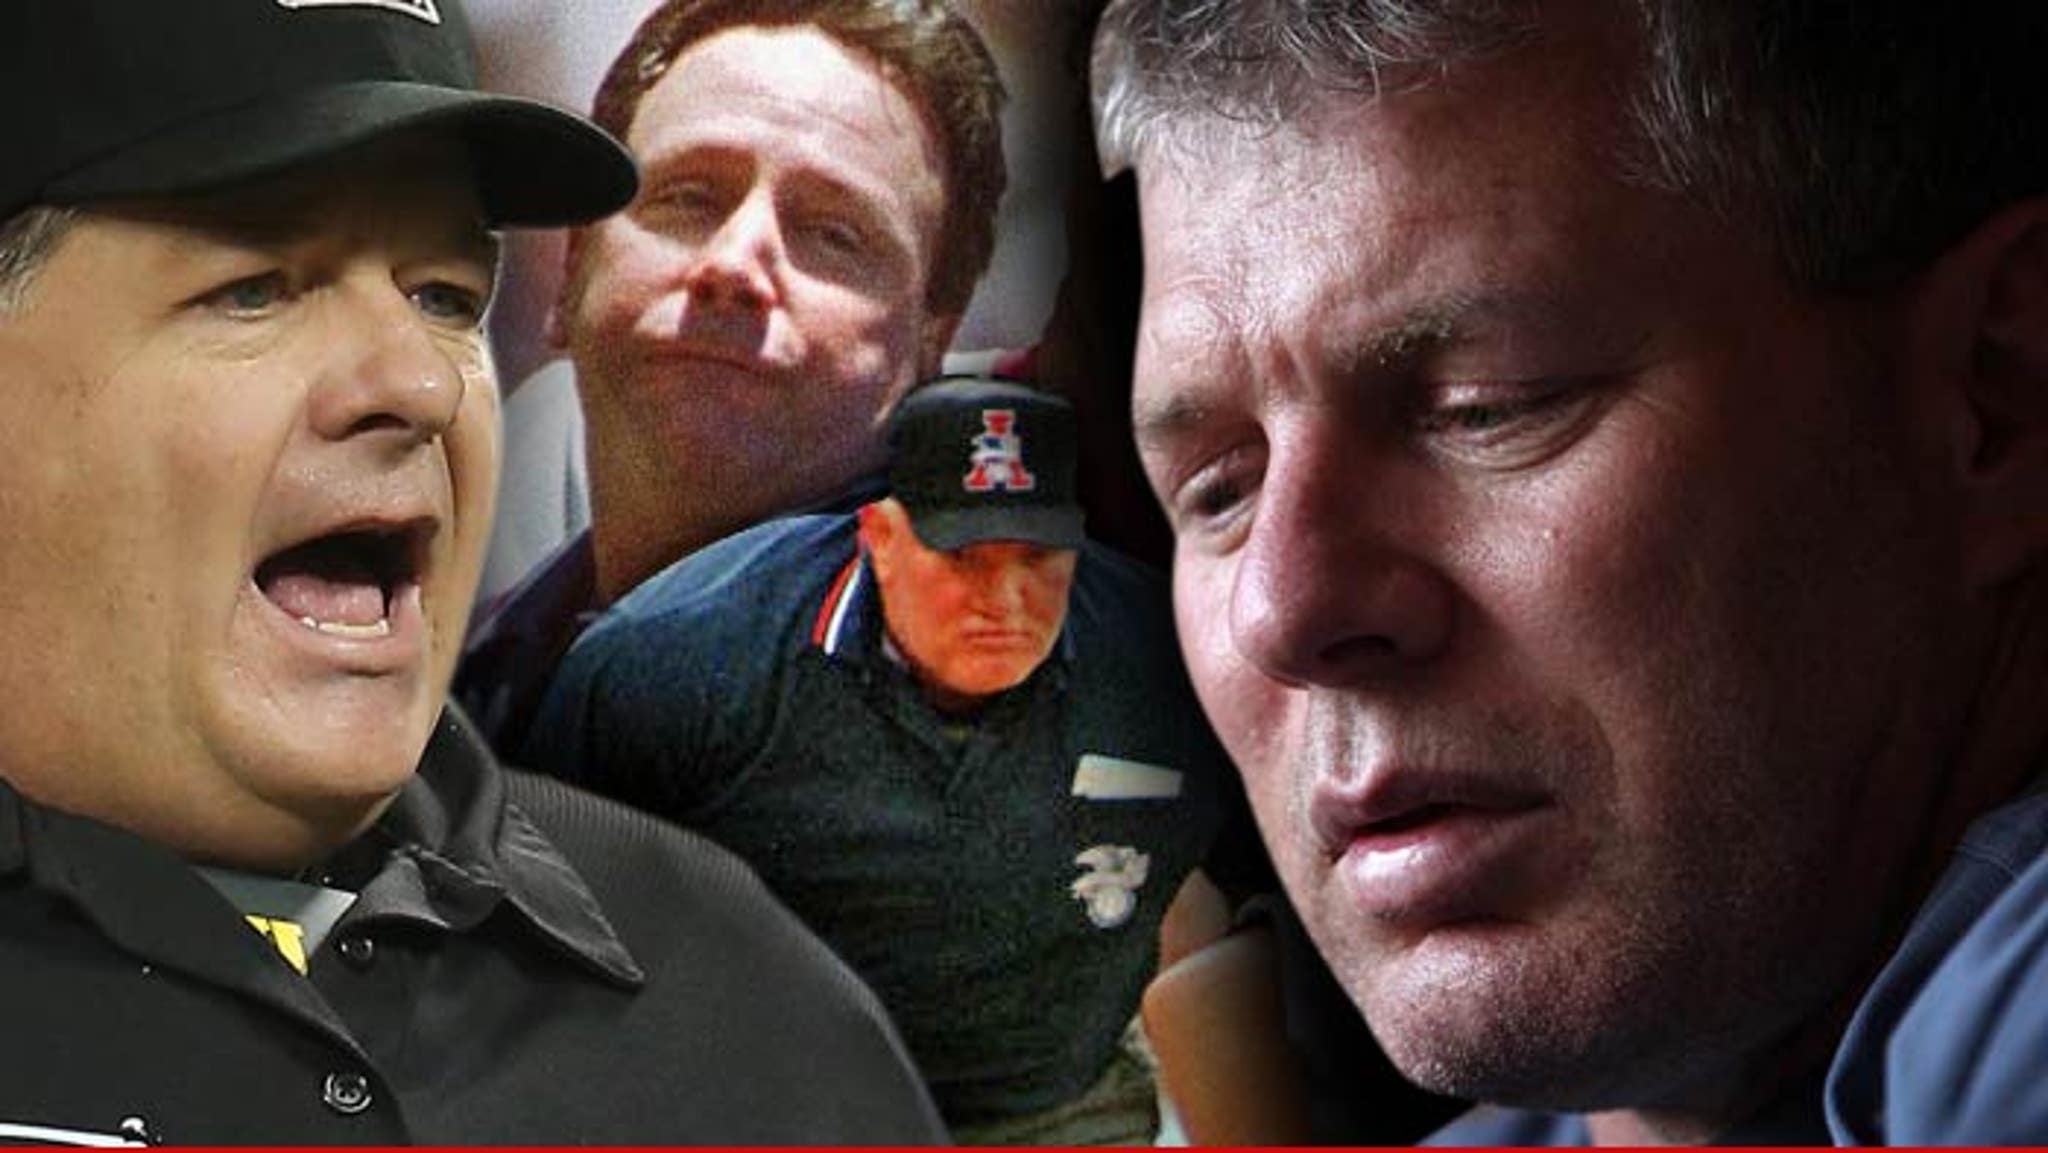 Lenny Dykstra tweets as if he's Jewish. Is it really him behind his words?